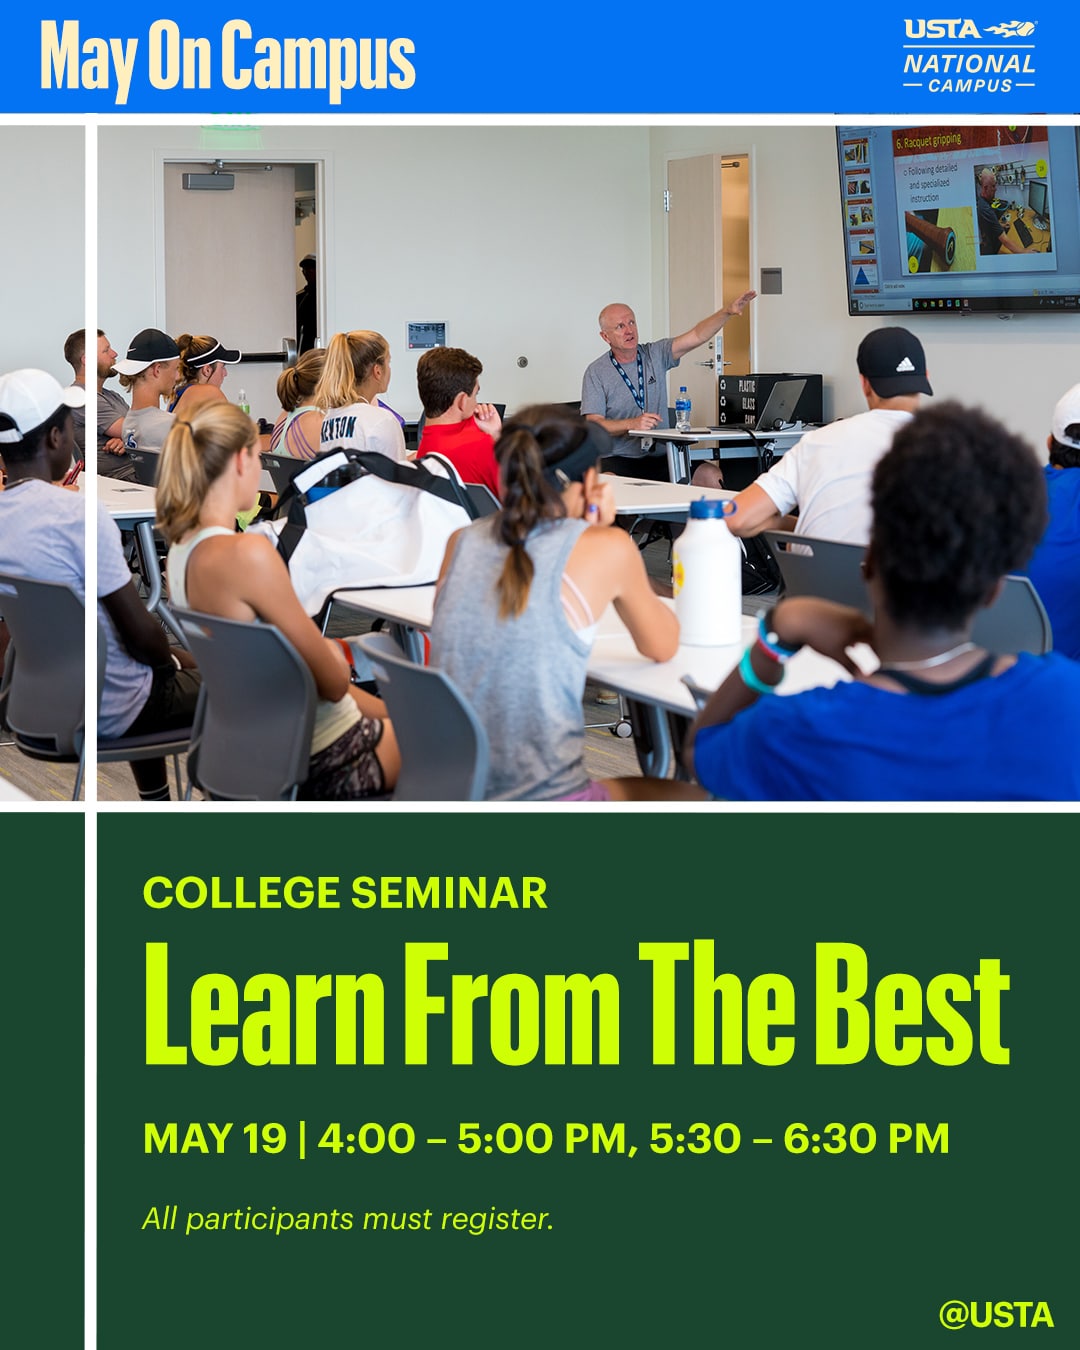 College Seminar: Learn From the Best - May 19 4-5pm, 5:30-6:30pm